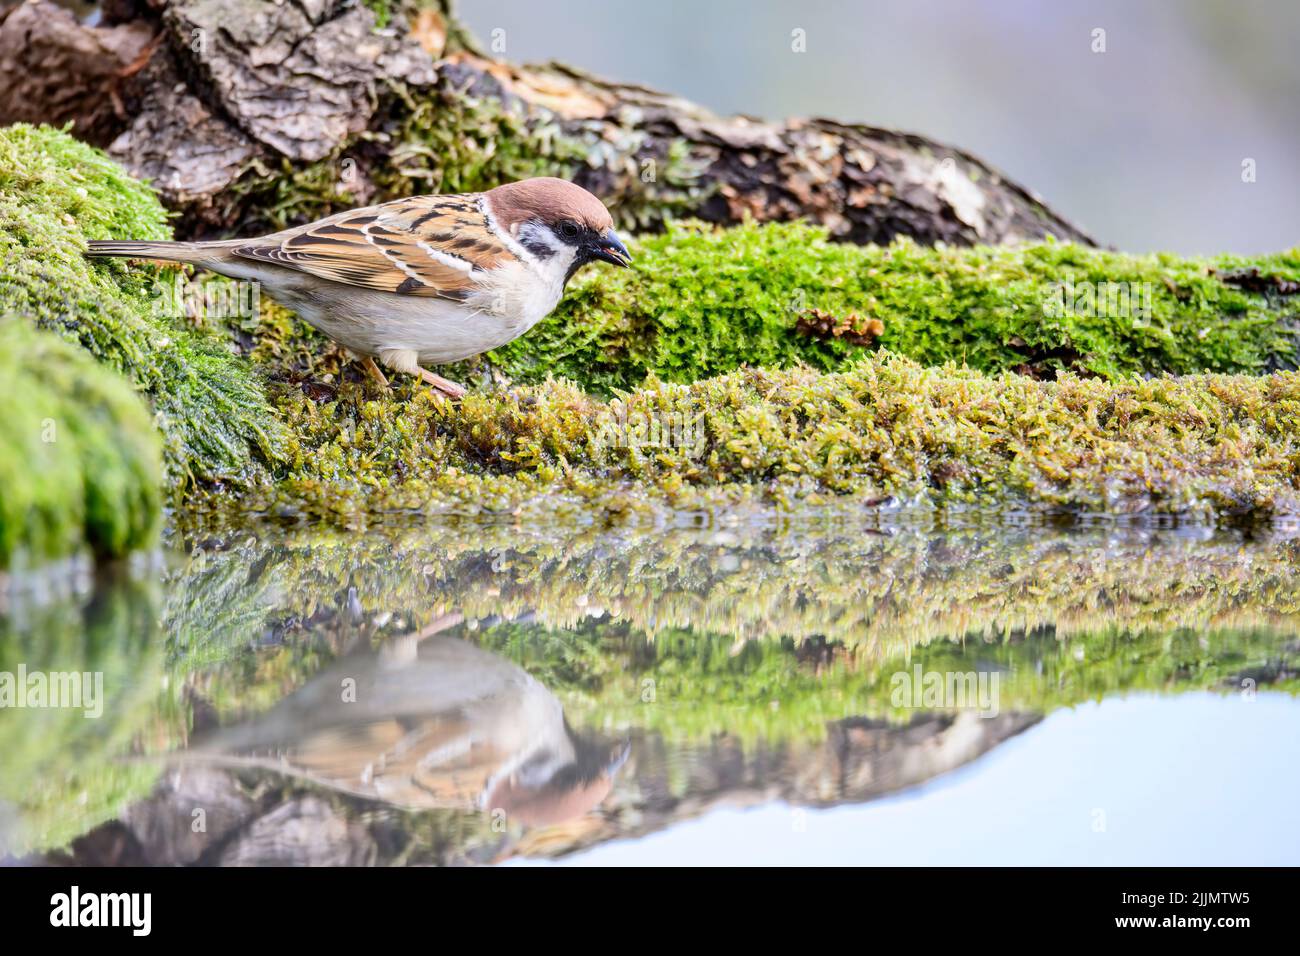 A closeup of a brown bird Eurasian Sparrow standing on edge of a pond and watching water surface Stock Photo